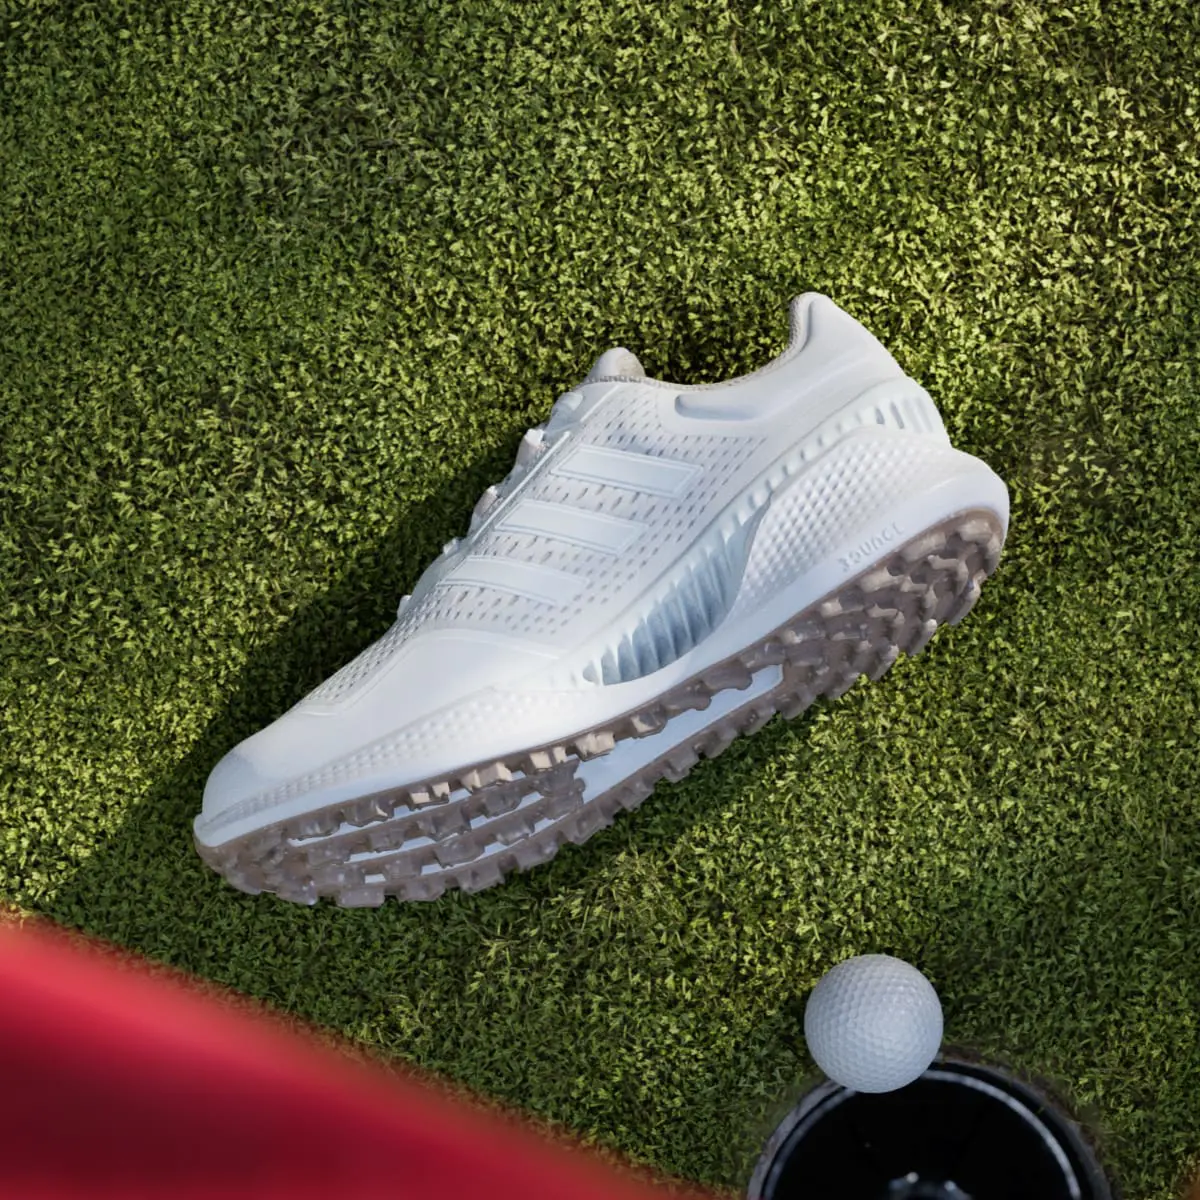 Adidas Summervent 24 Bounce Golf Shoes Low. 2